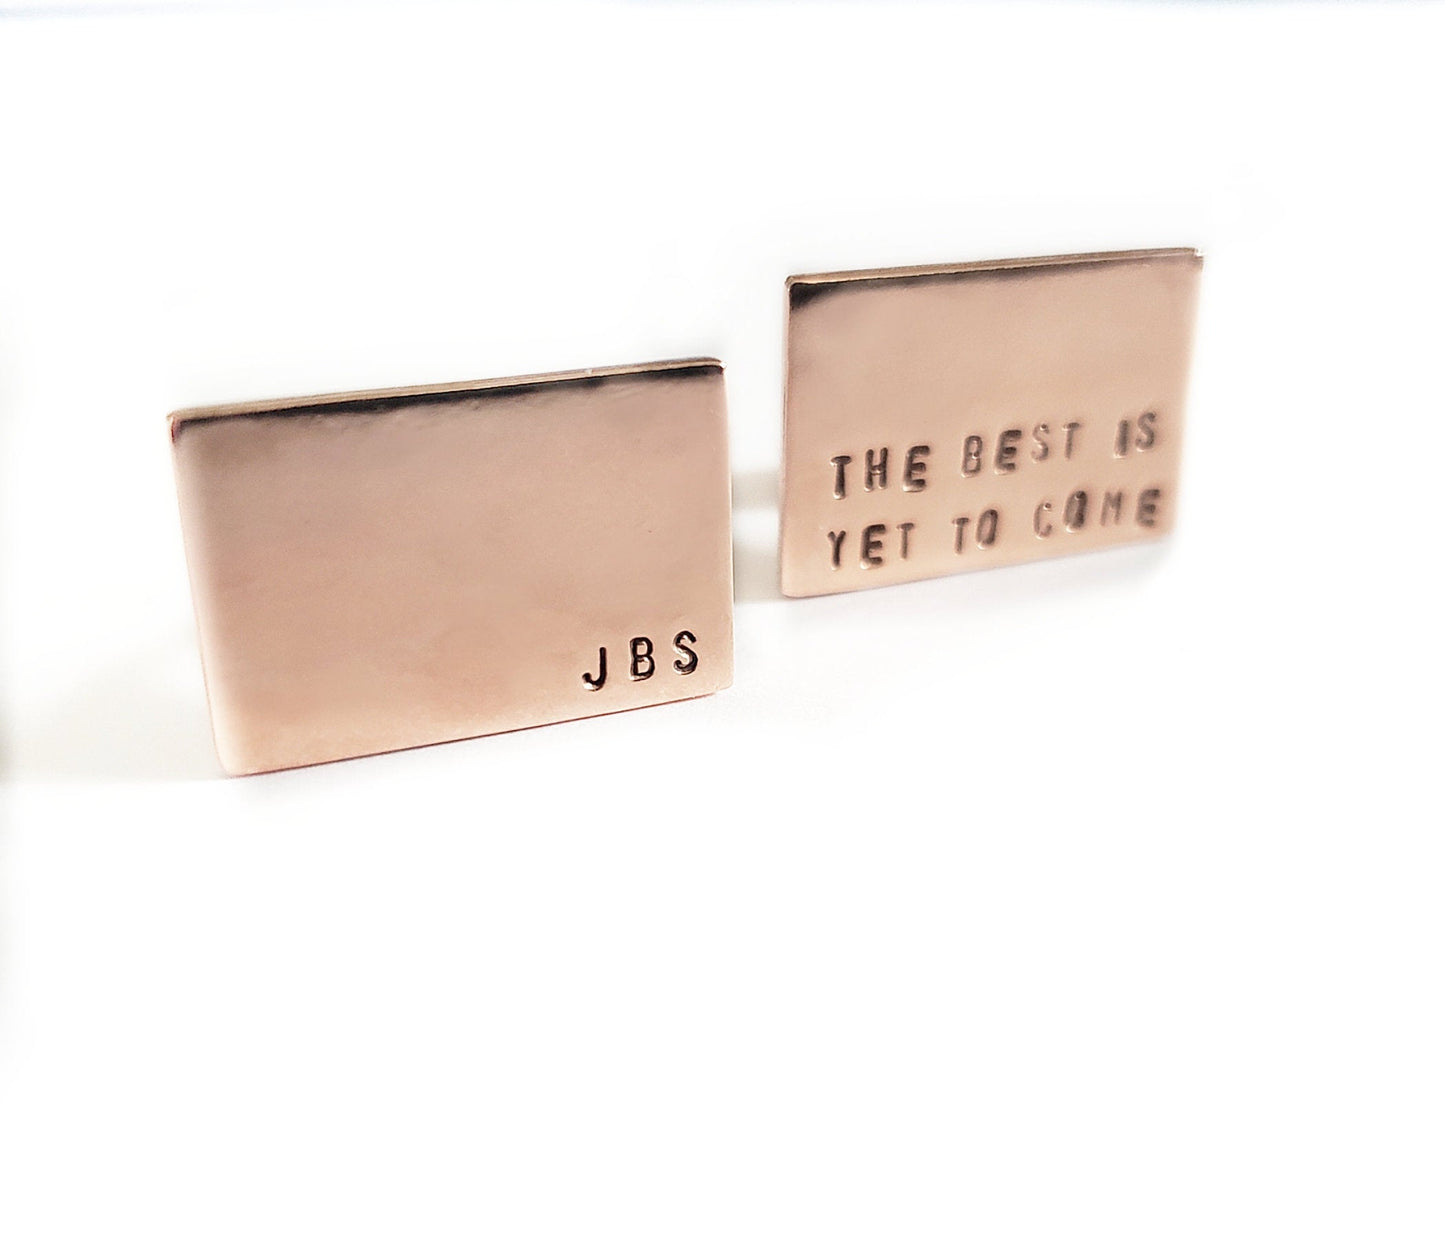 The Best is Yet to Come - Copper Hidden Heart Cuff Links